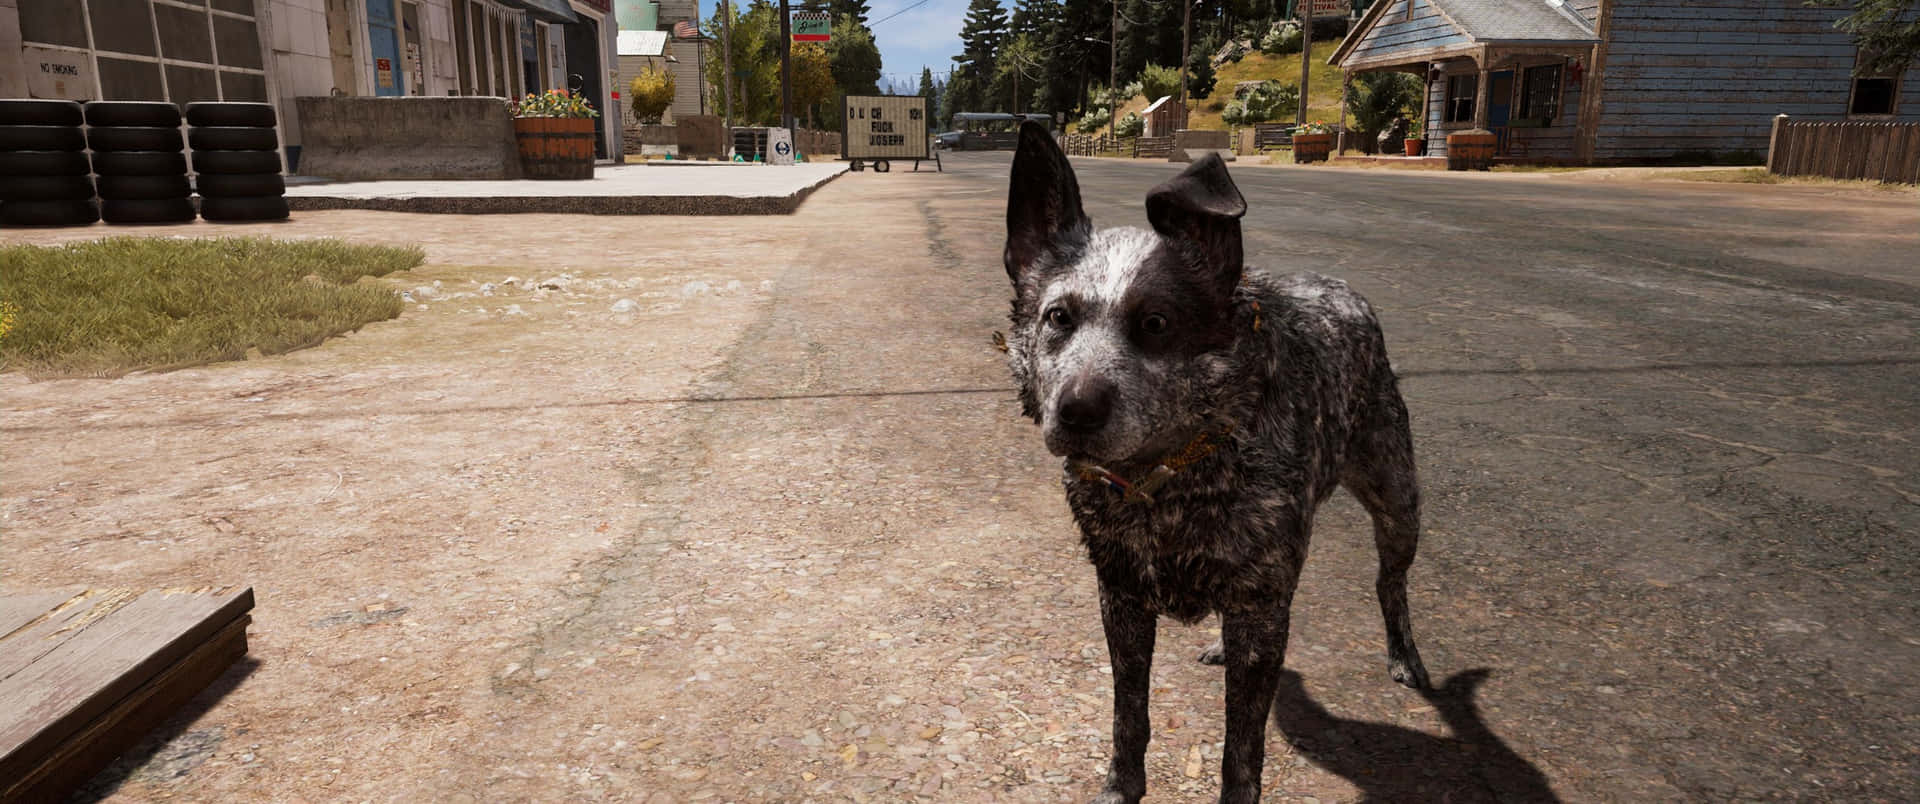 A Dog Is Standing On A Street In A Game